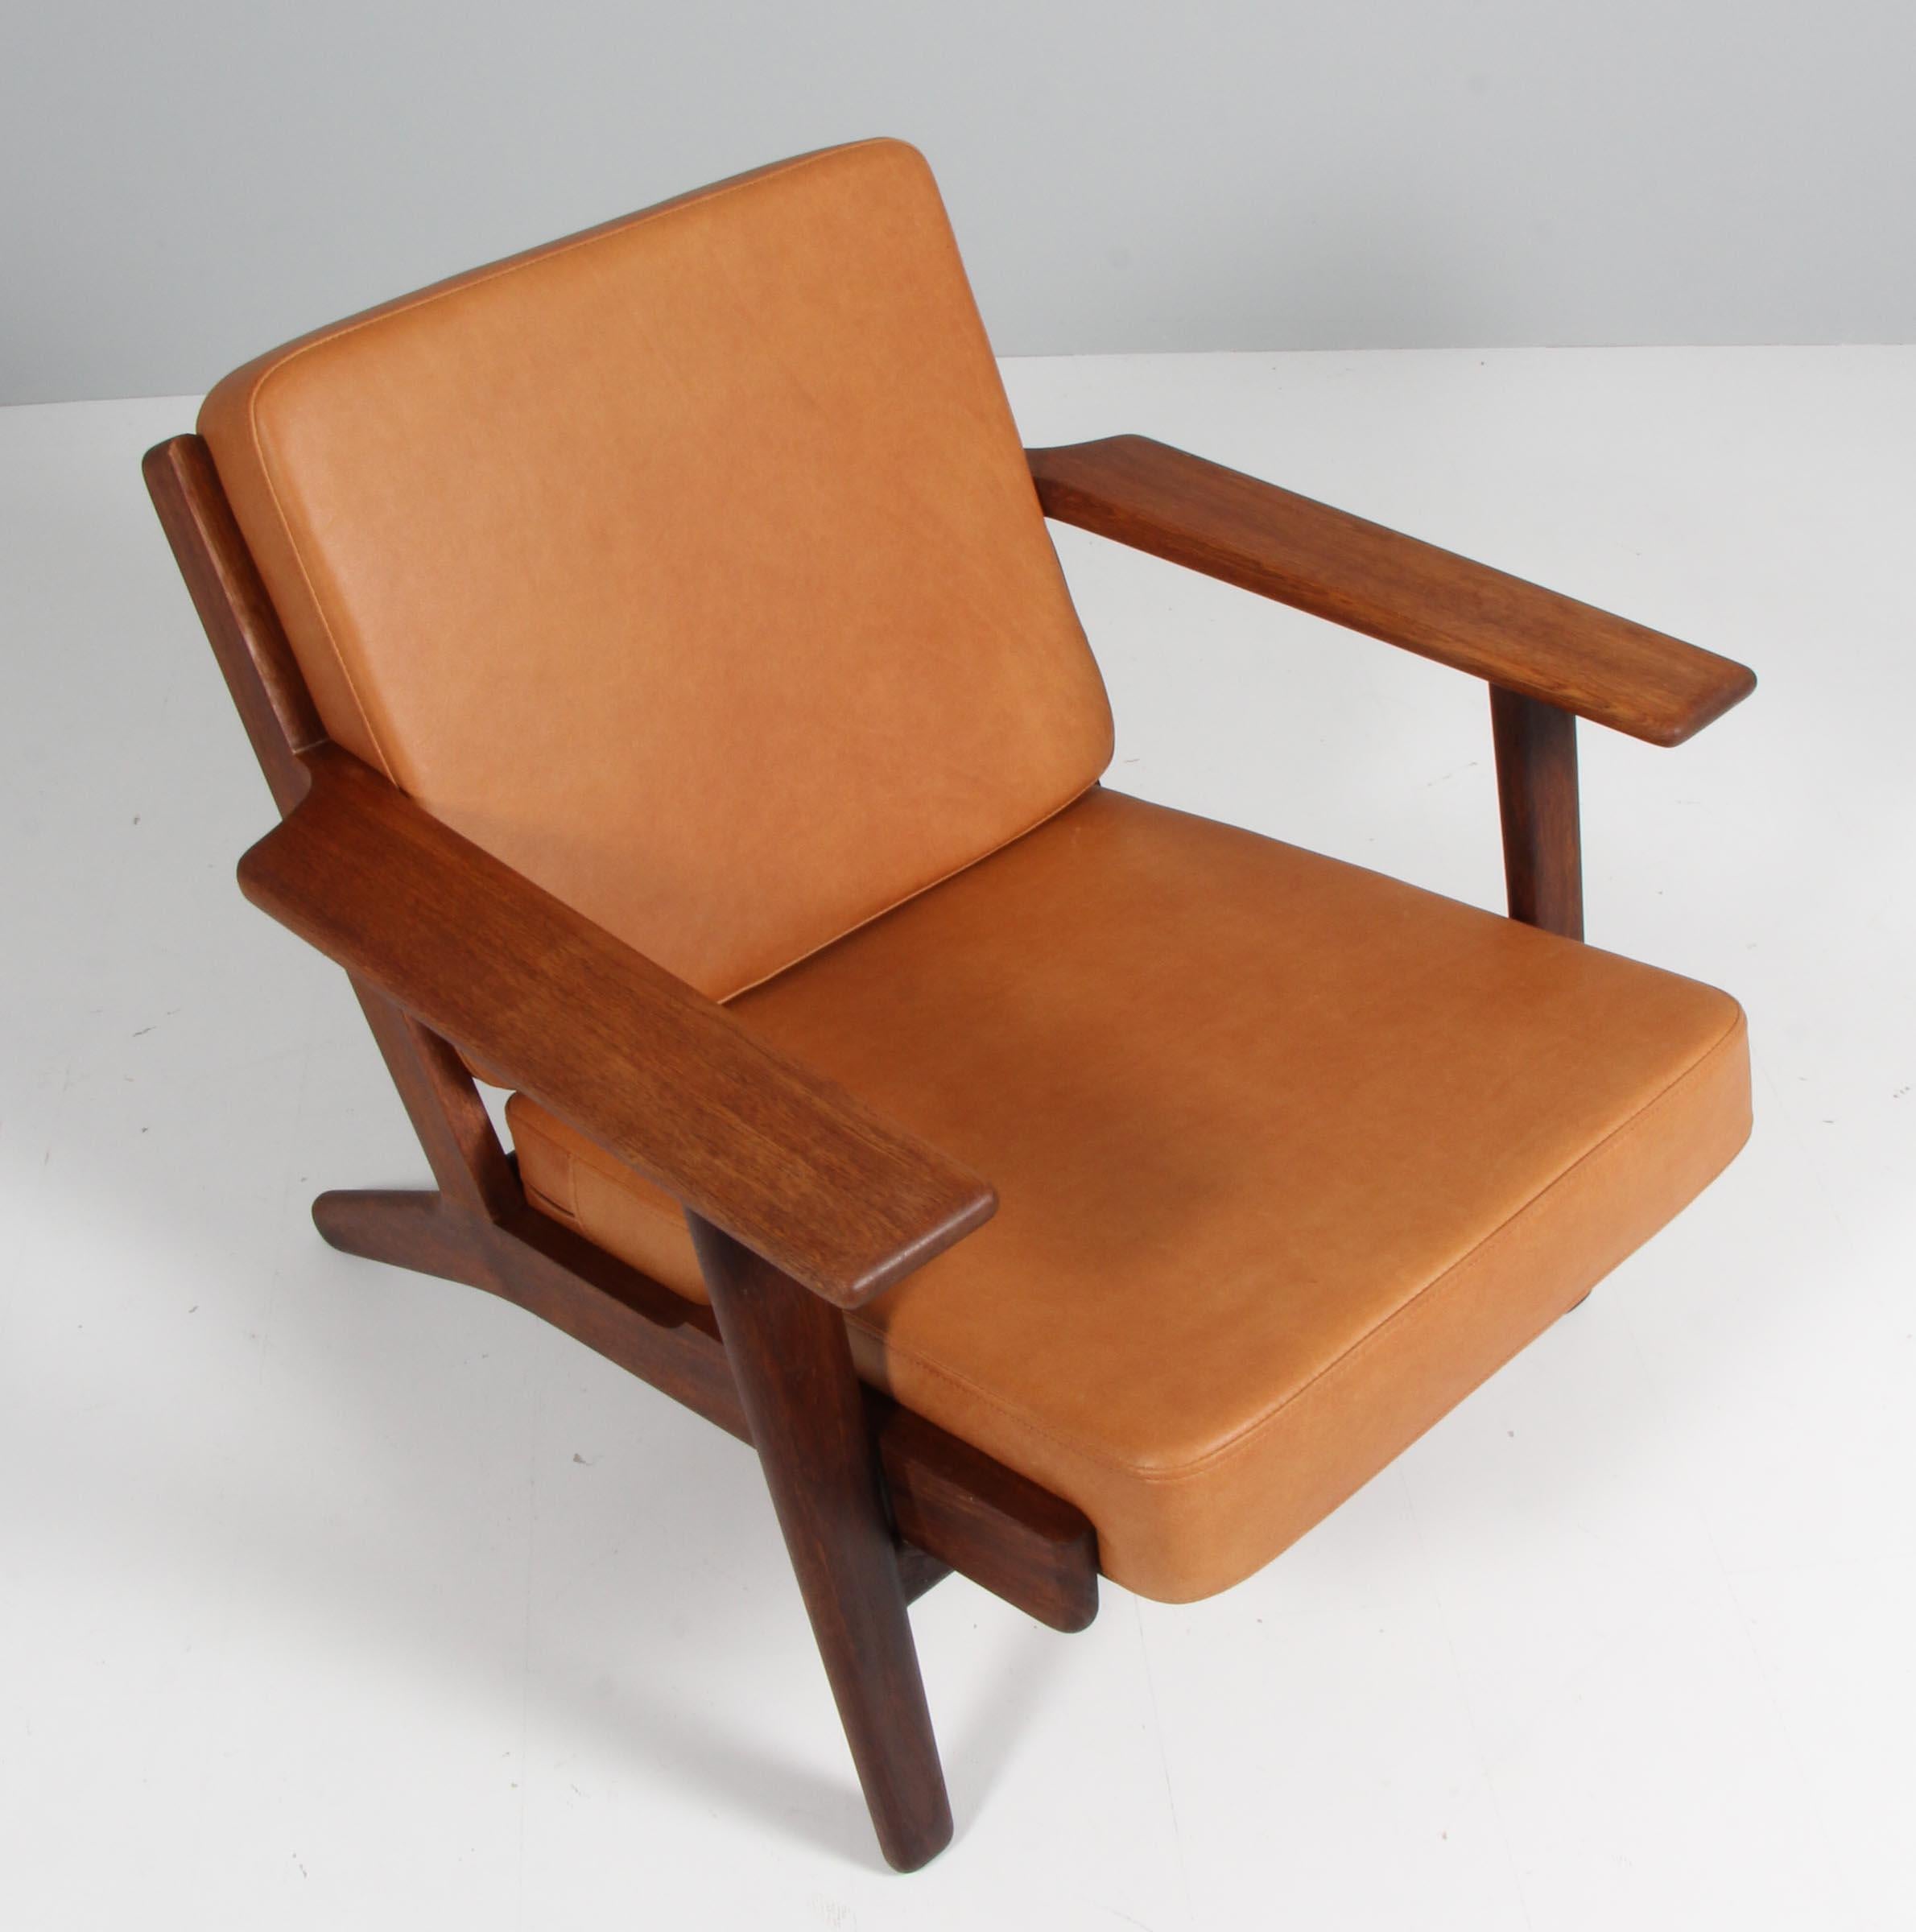 Hans J. Wegner lounge chair made of solid smoked oak.

New upholstered with vintage tan aniline leather.

Model 290, made by GETAMA.

